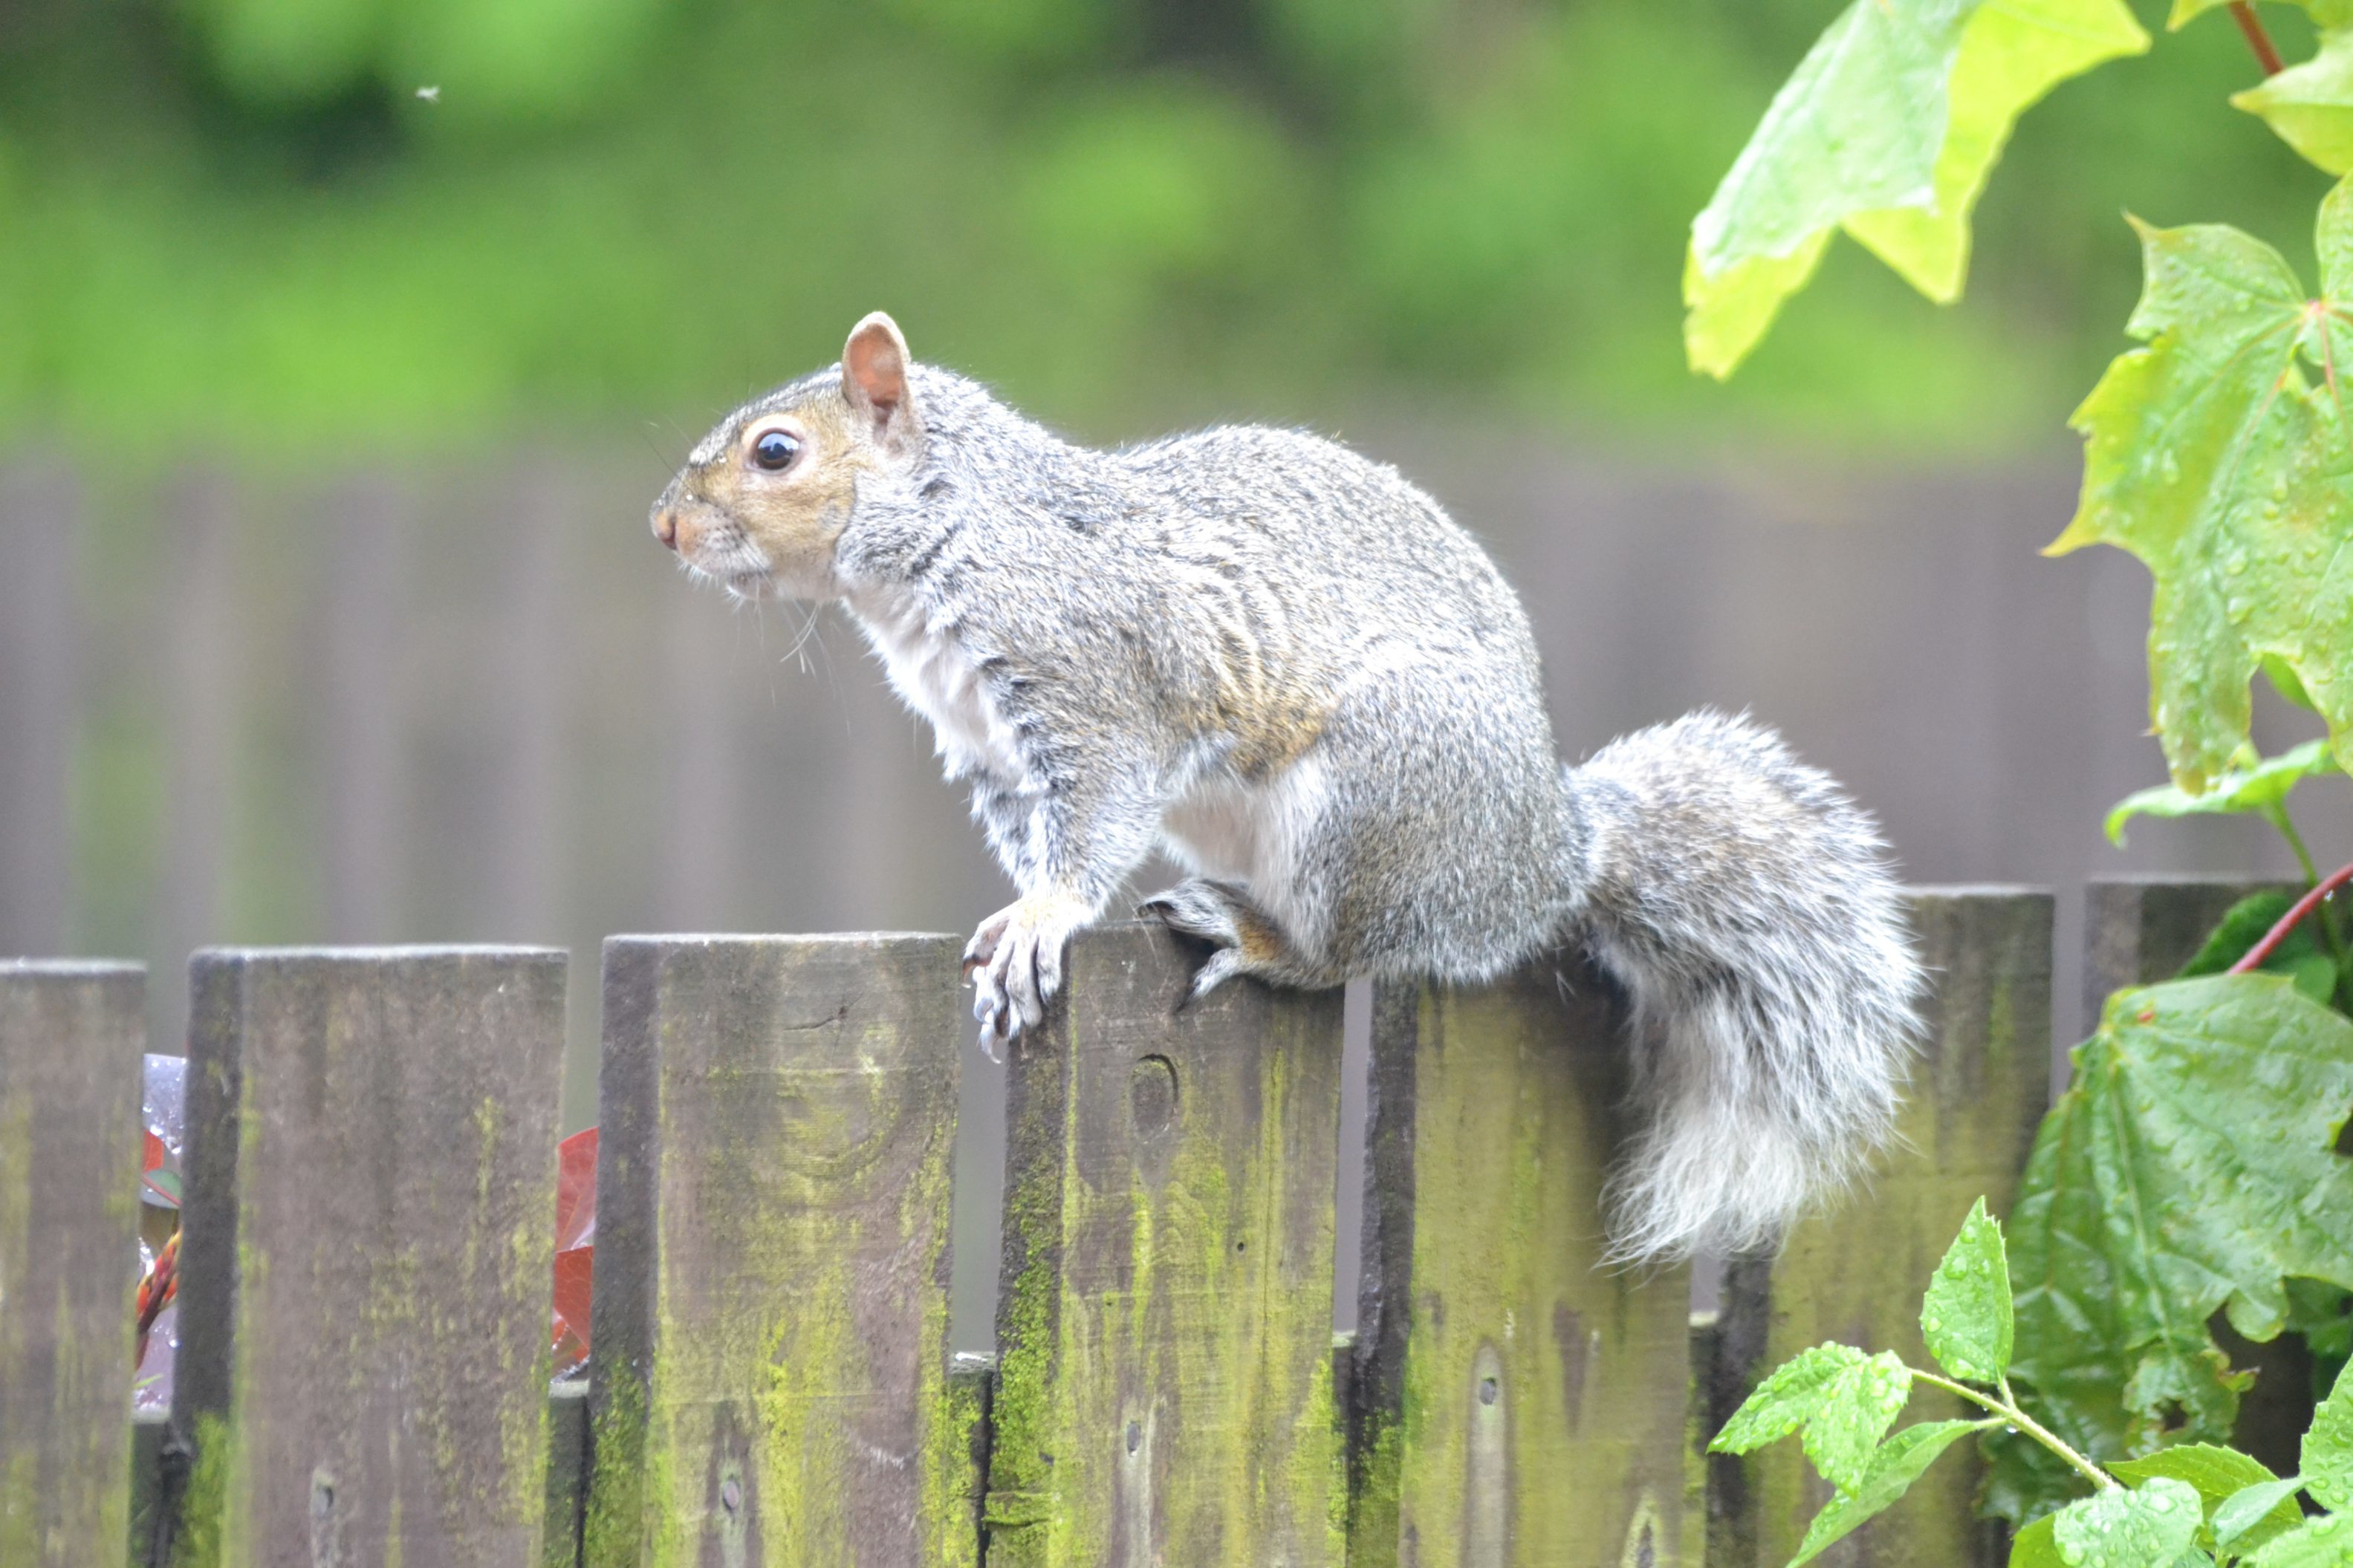 Grey squirrels contributed to 144 call-outs for mammal pest control in Dundee.